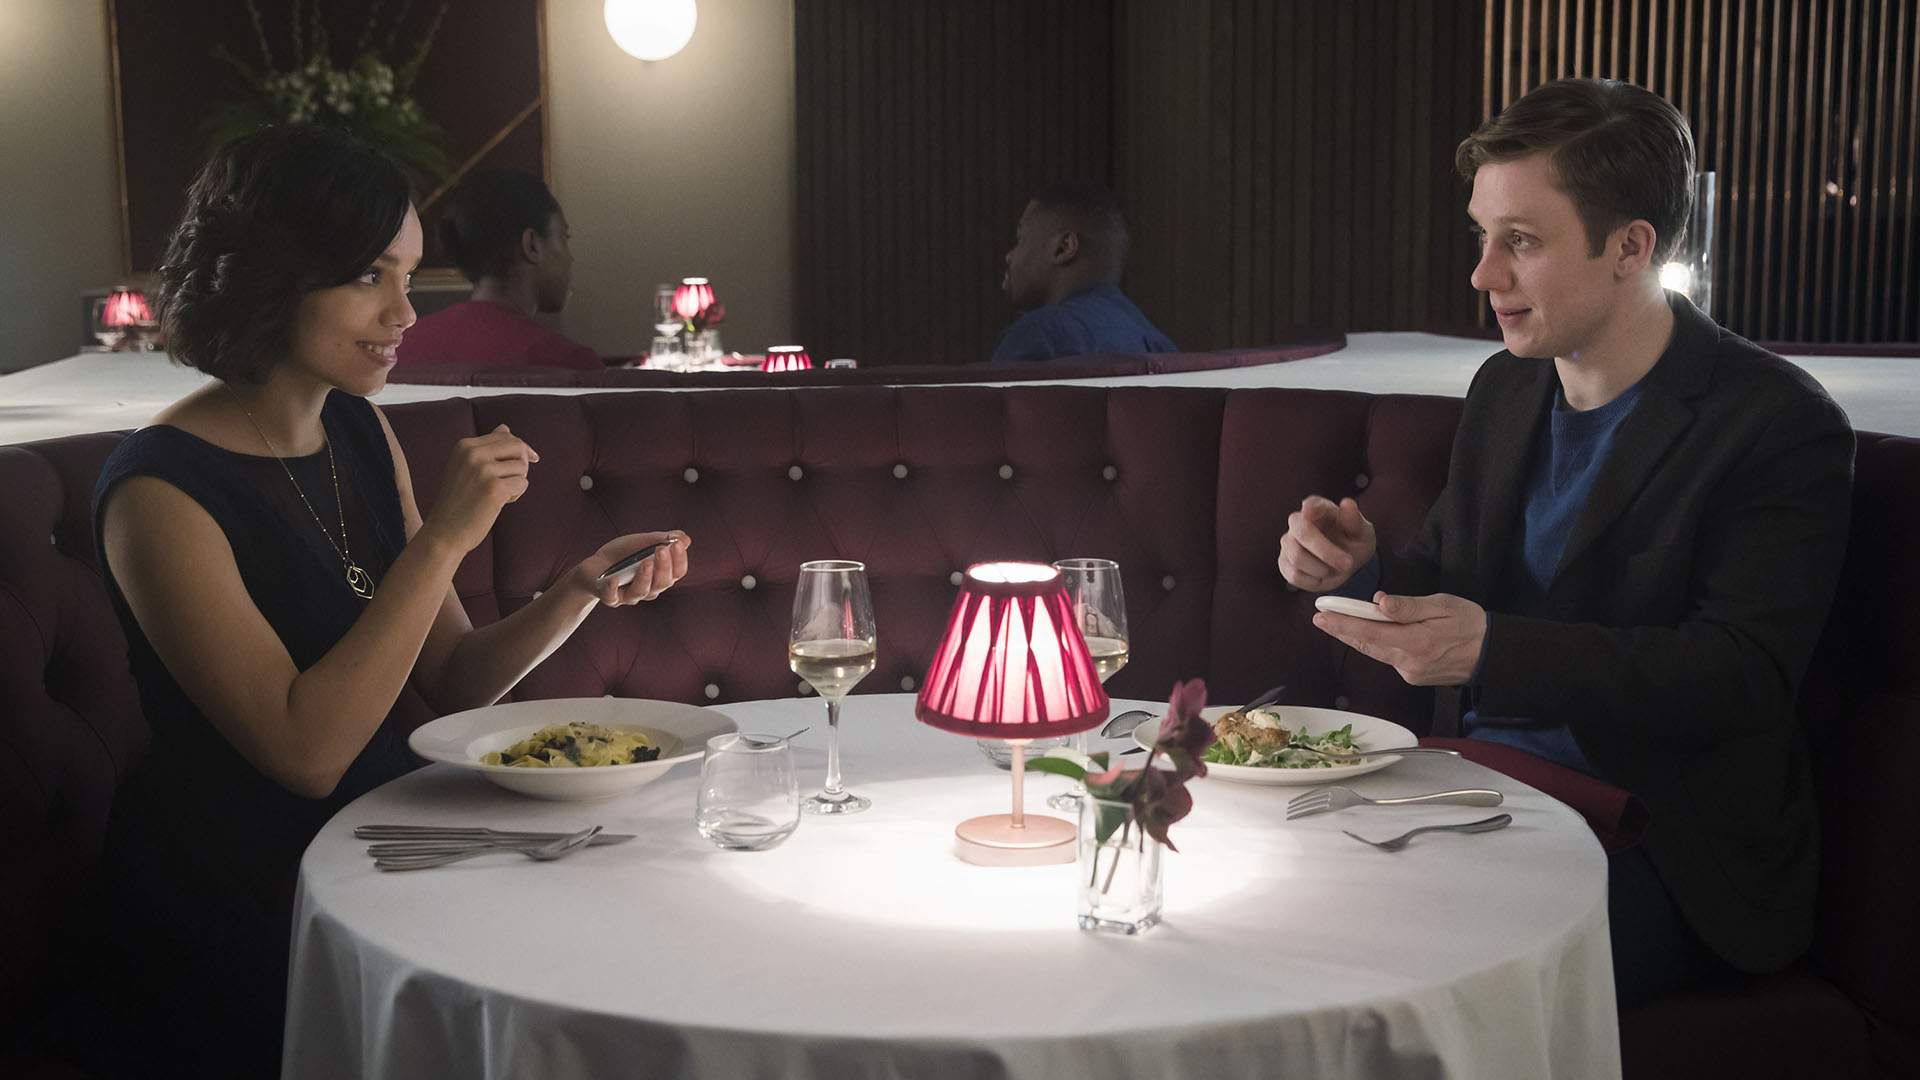 "What Have We Missed?": 'Black Mirror' Has Started Teasing Its Long-Awaited Sixth Season